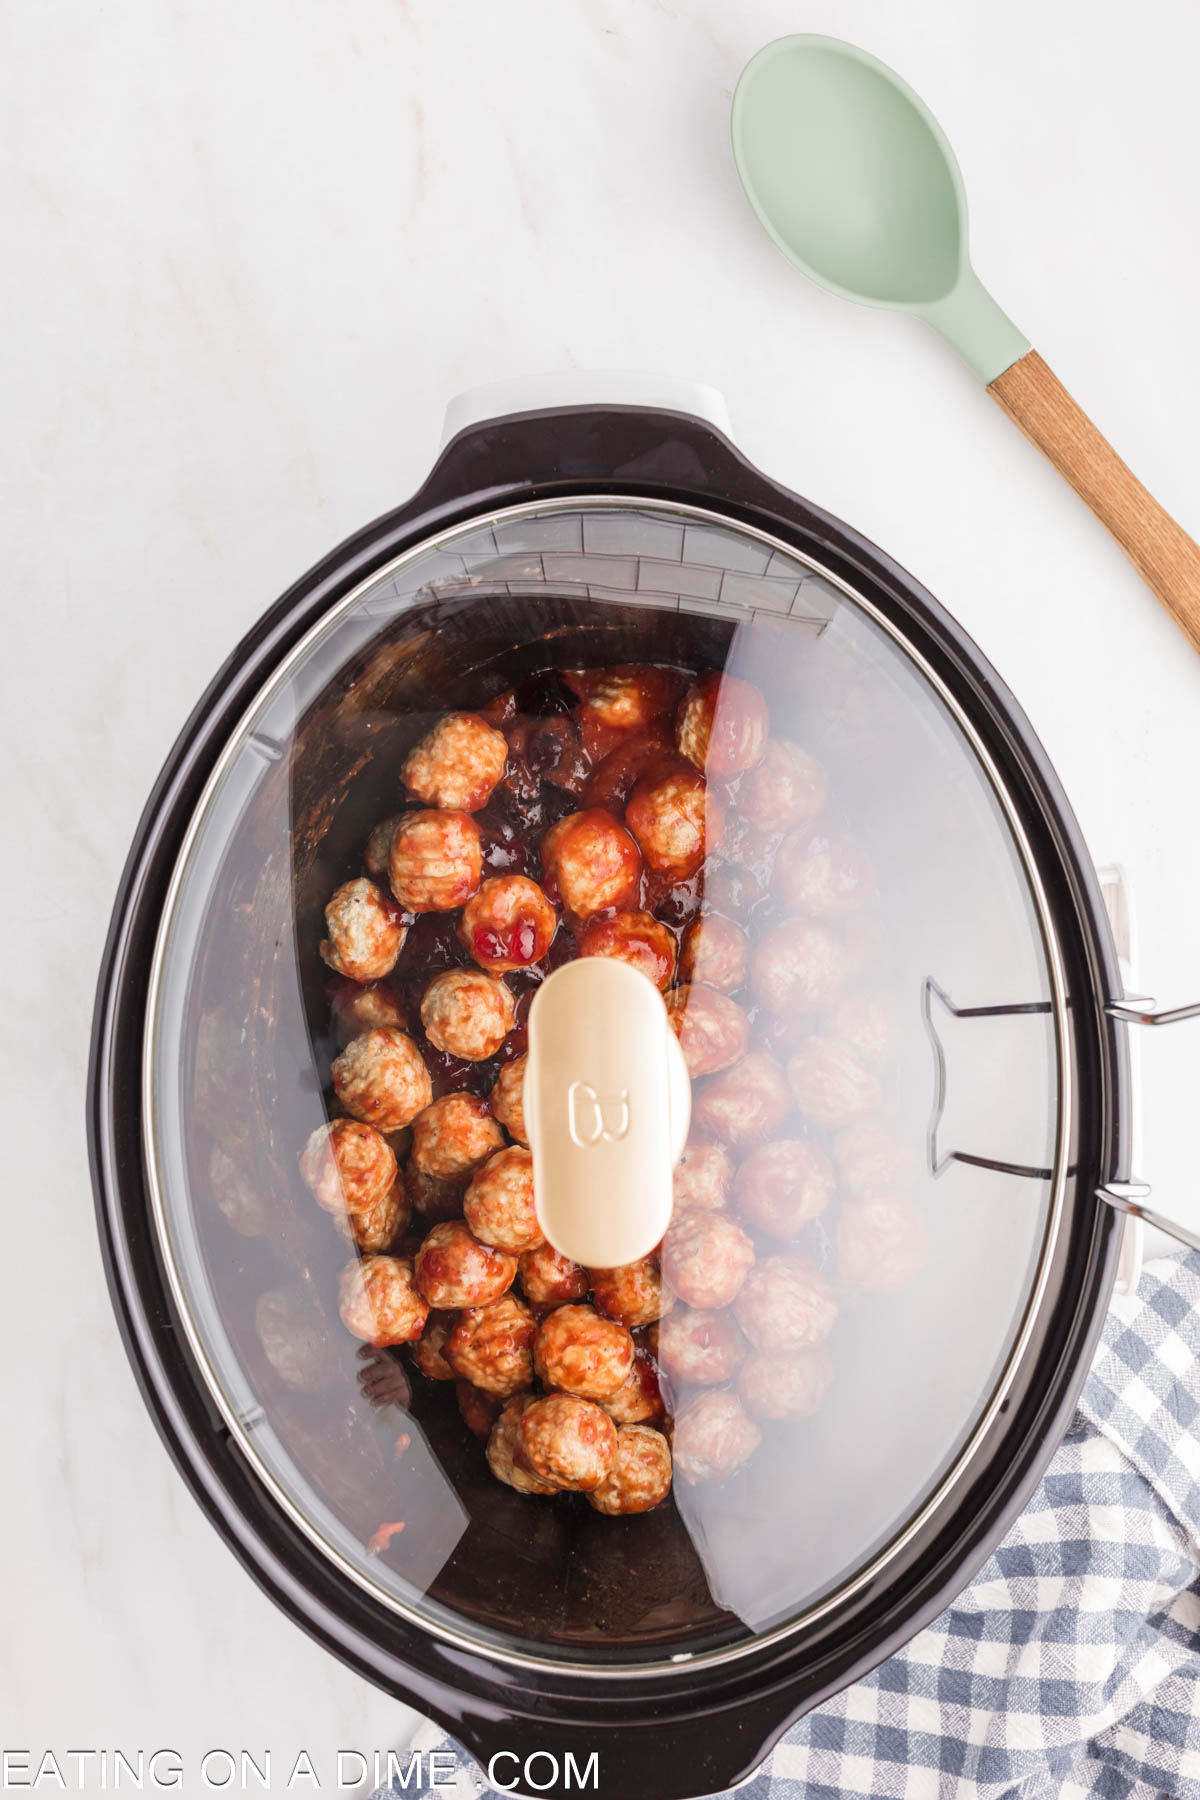 Cooking the meatballs in the slow cooker